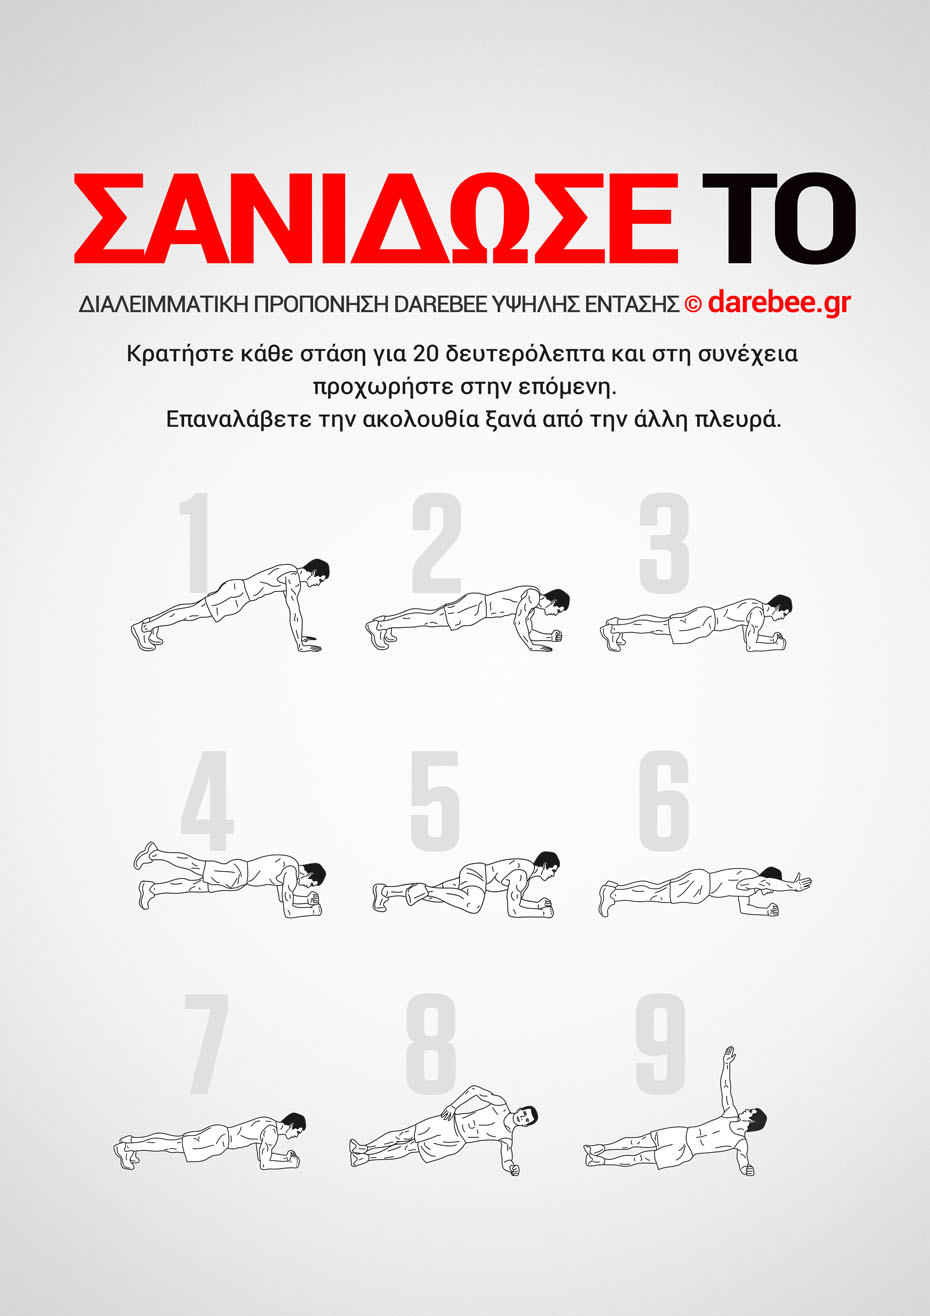 Epic Plank is a Darebee home-fitness workout that targets your core as well as the other abdominal groups that deliver overall stronger abdominal muscles.